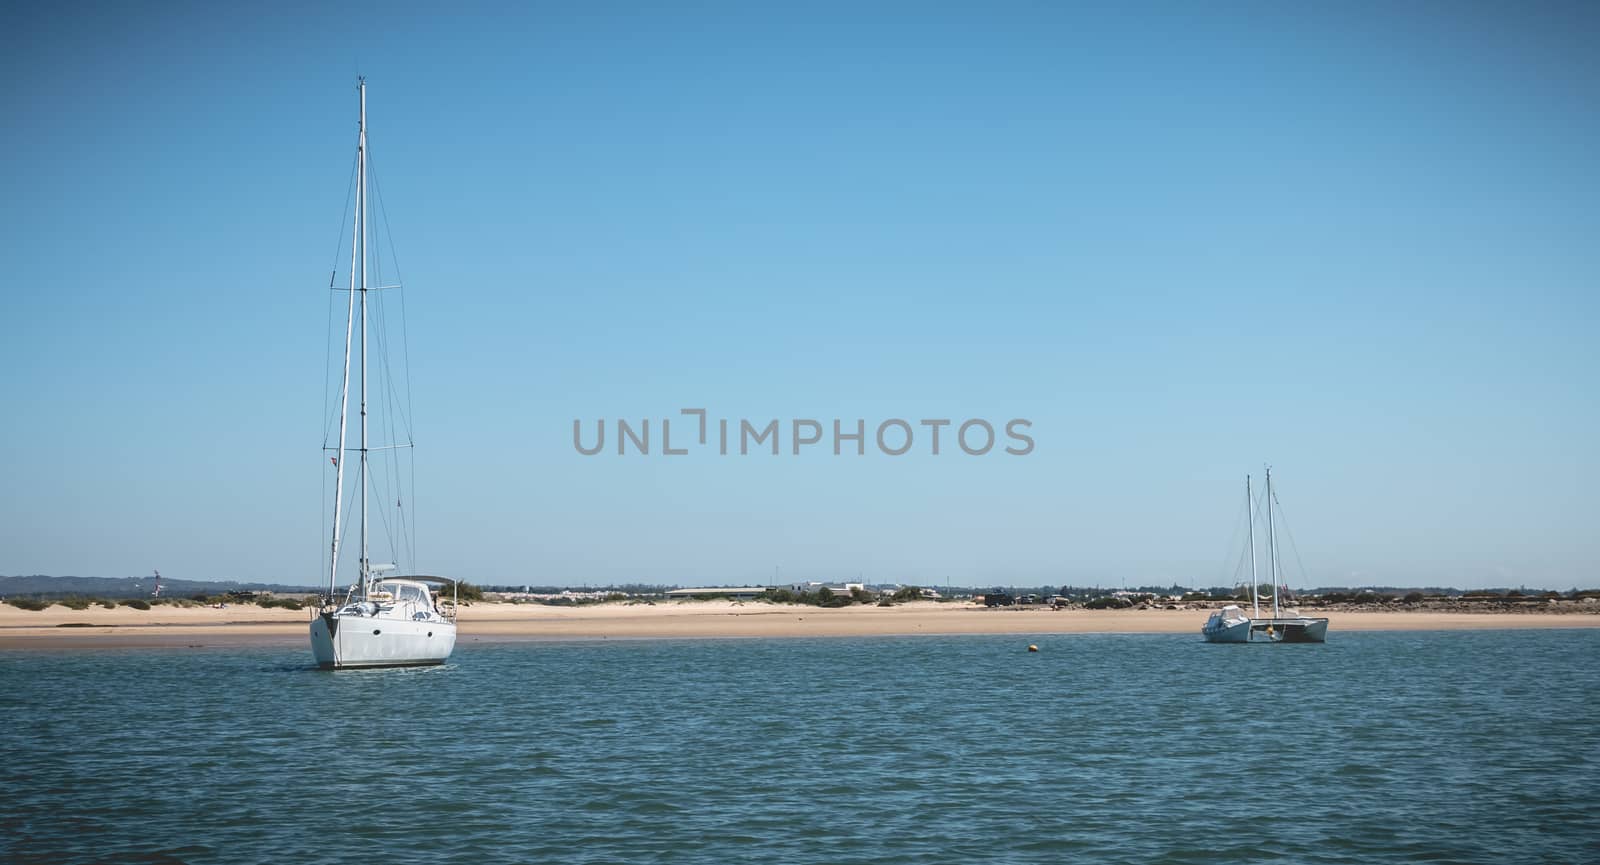 Tavira, Portugal - May 3, 2018: Sailing boat moored in the lagoons of the Ria Formosa Natural Park near the port of Tavira on a spring day